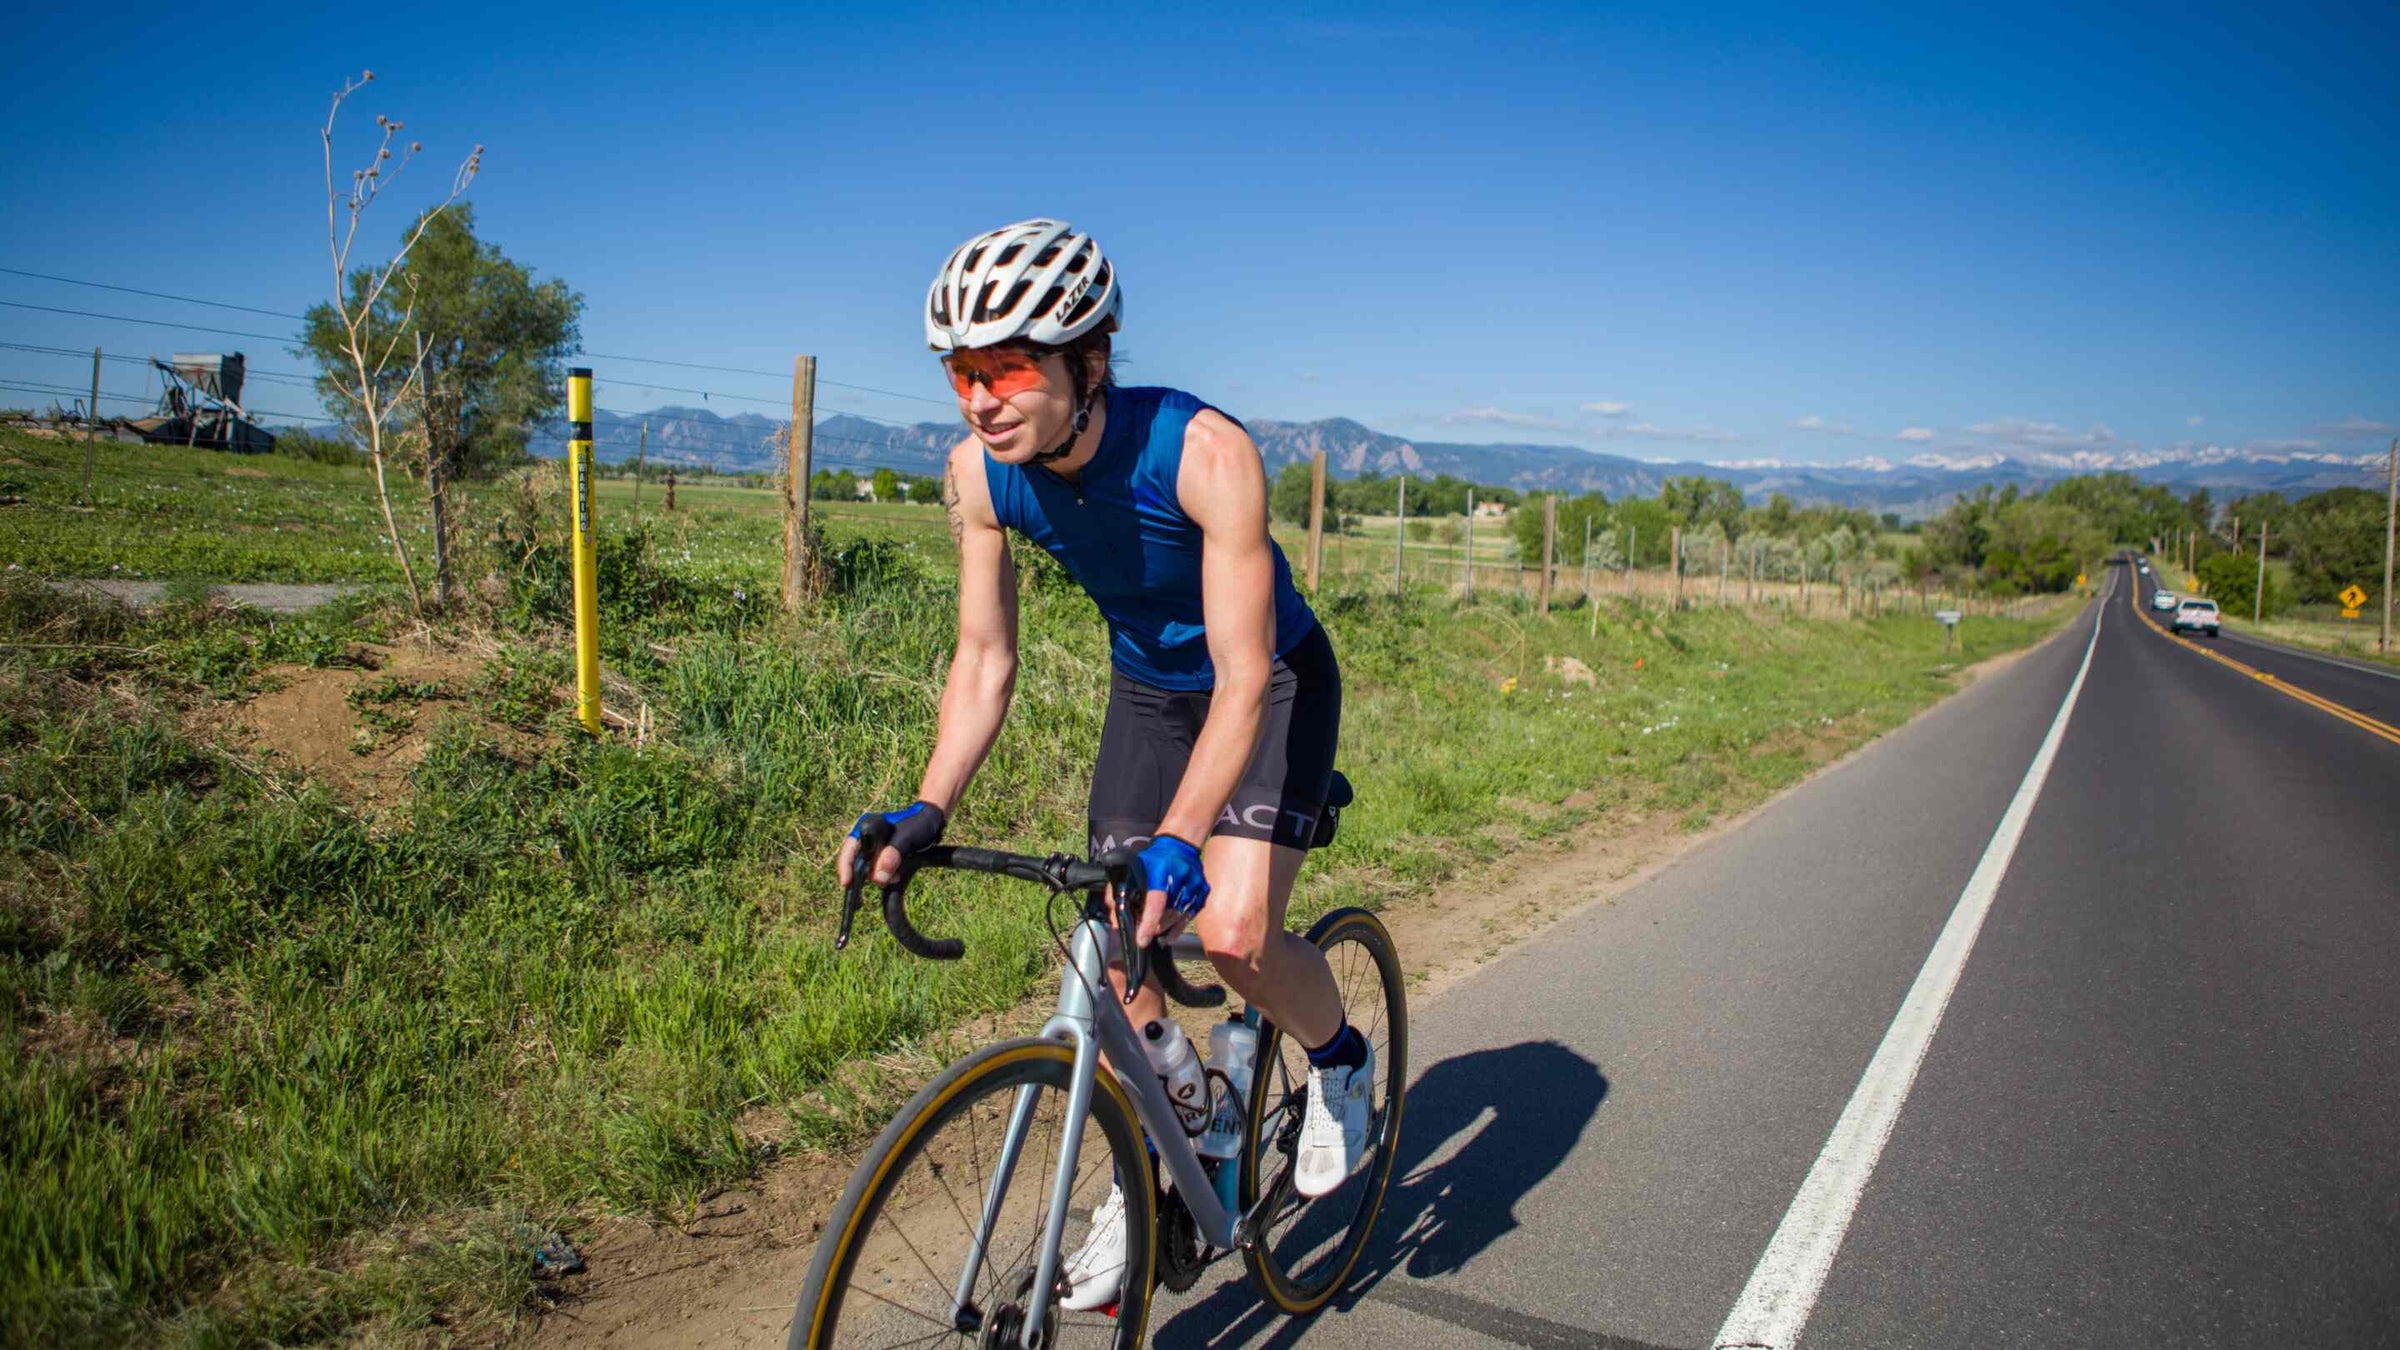 Women's Sleeveless Cycling Jerseys by Pactimo